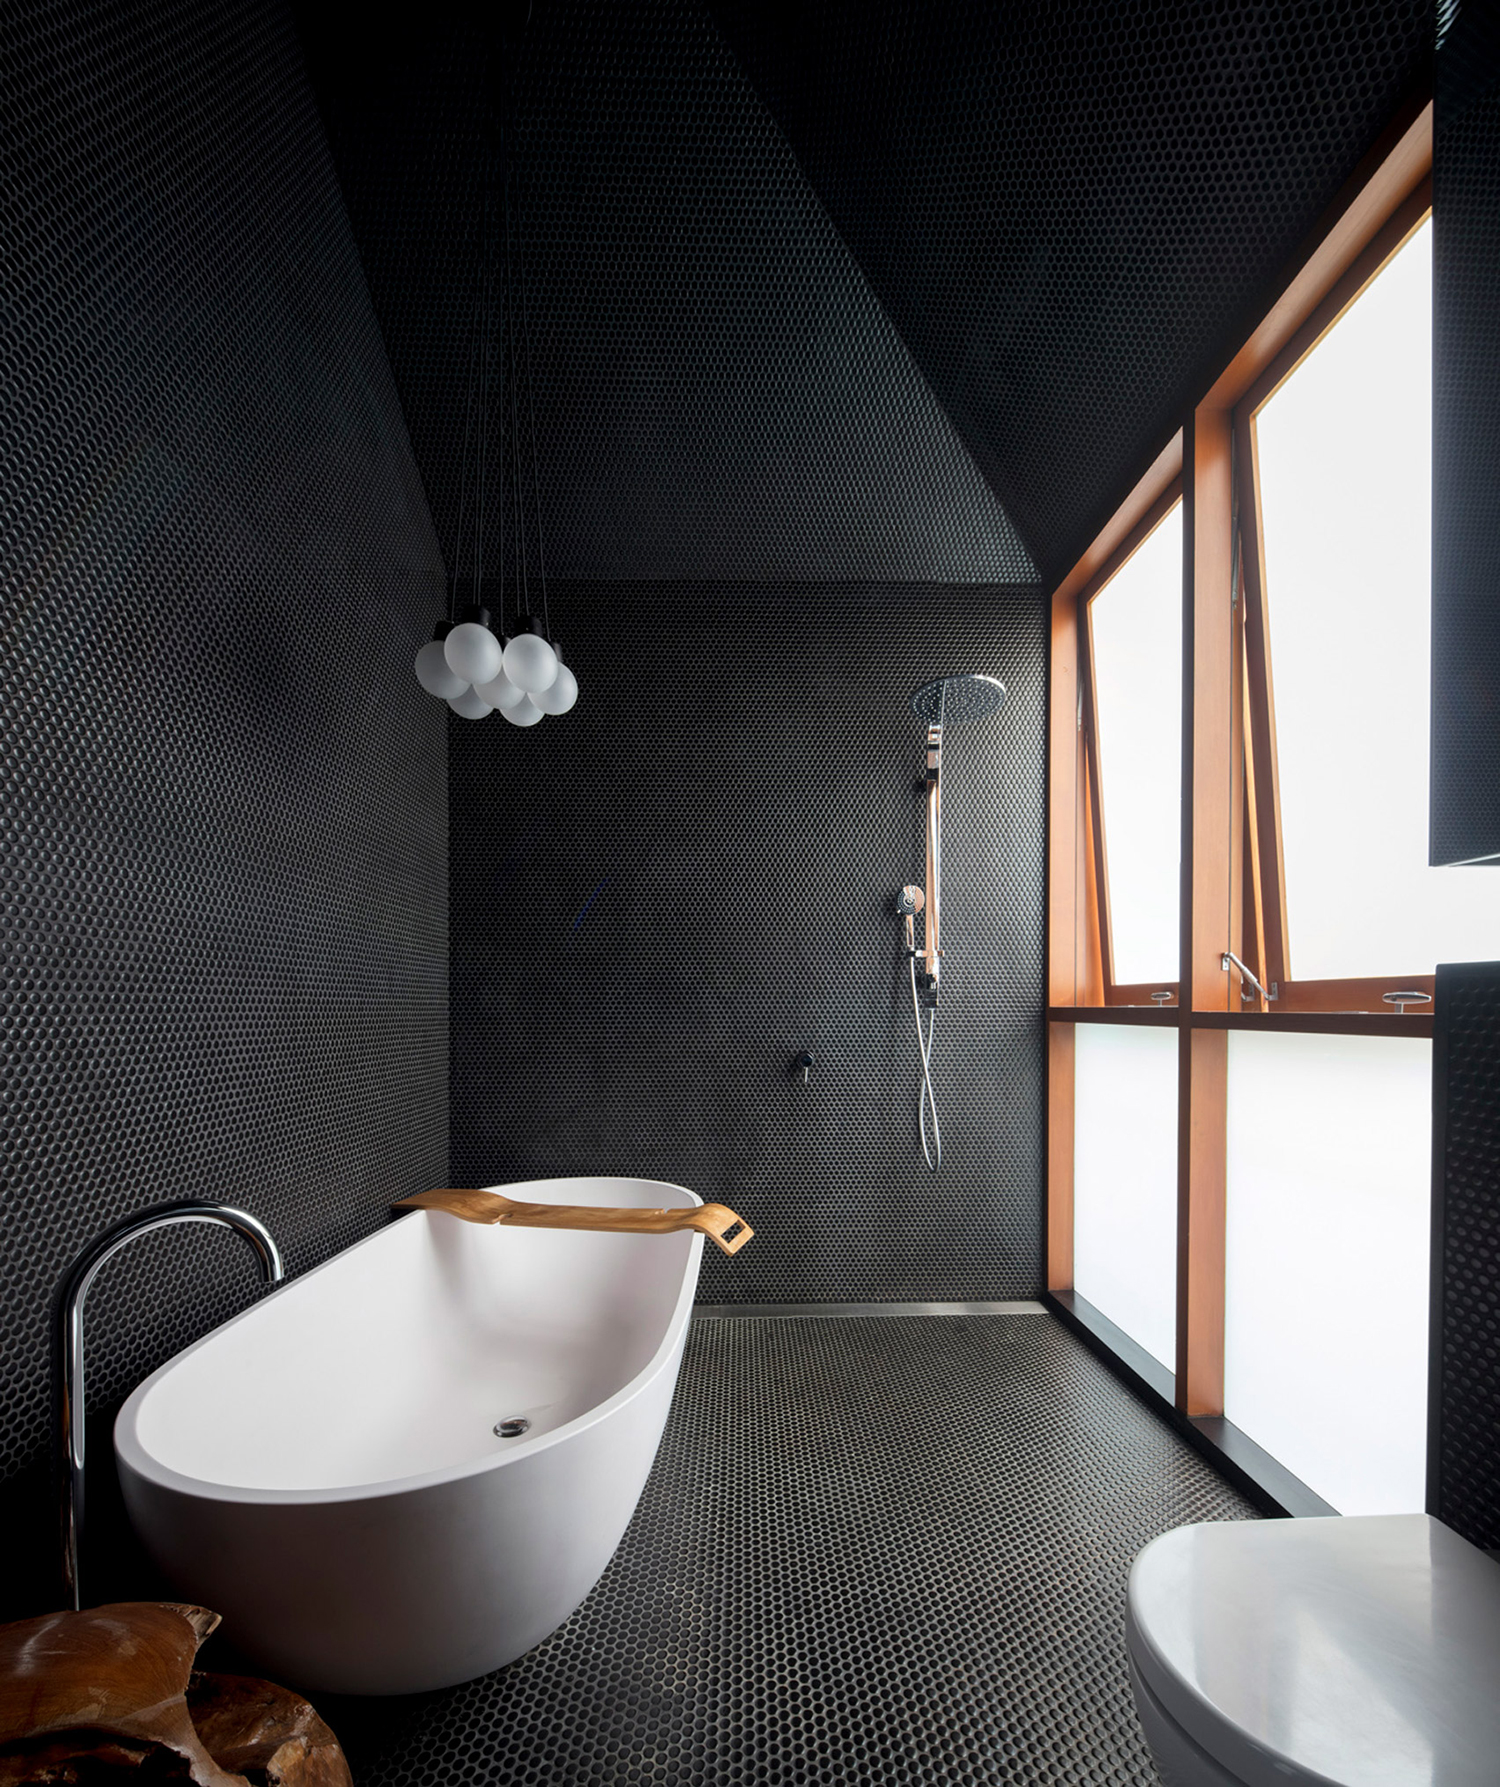 Bathroom Design Tips to Make It Fancy and Efficient